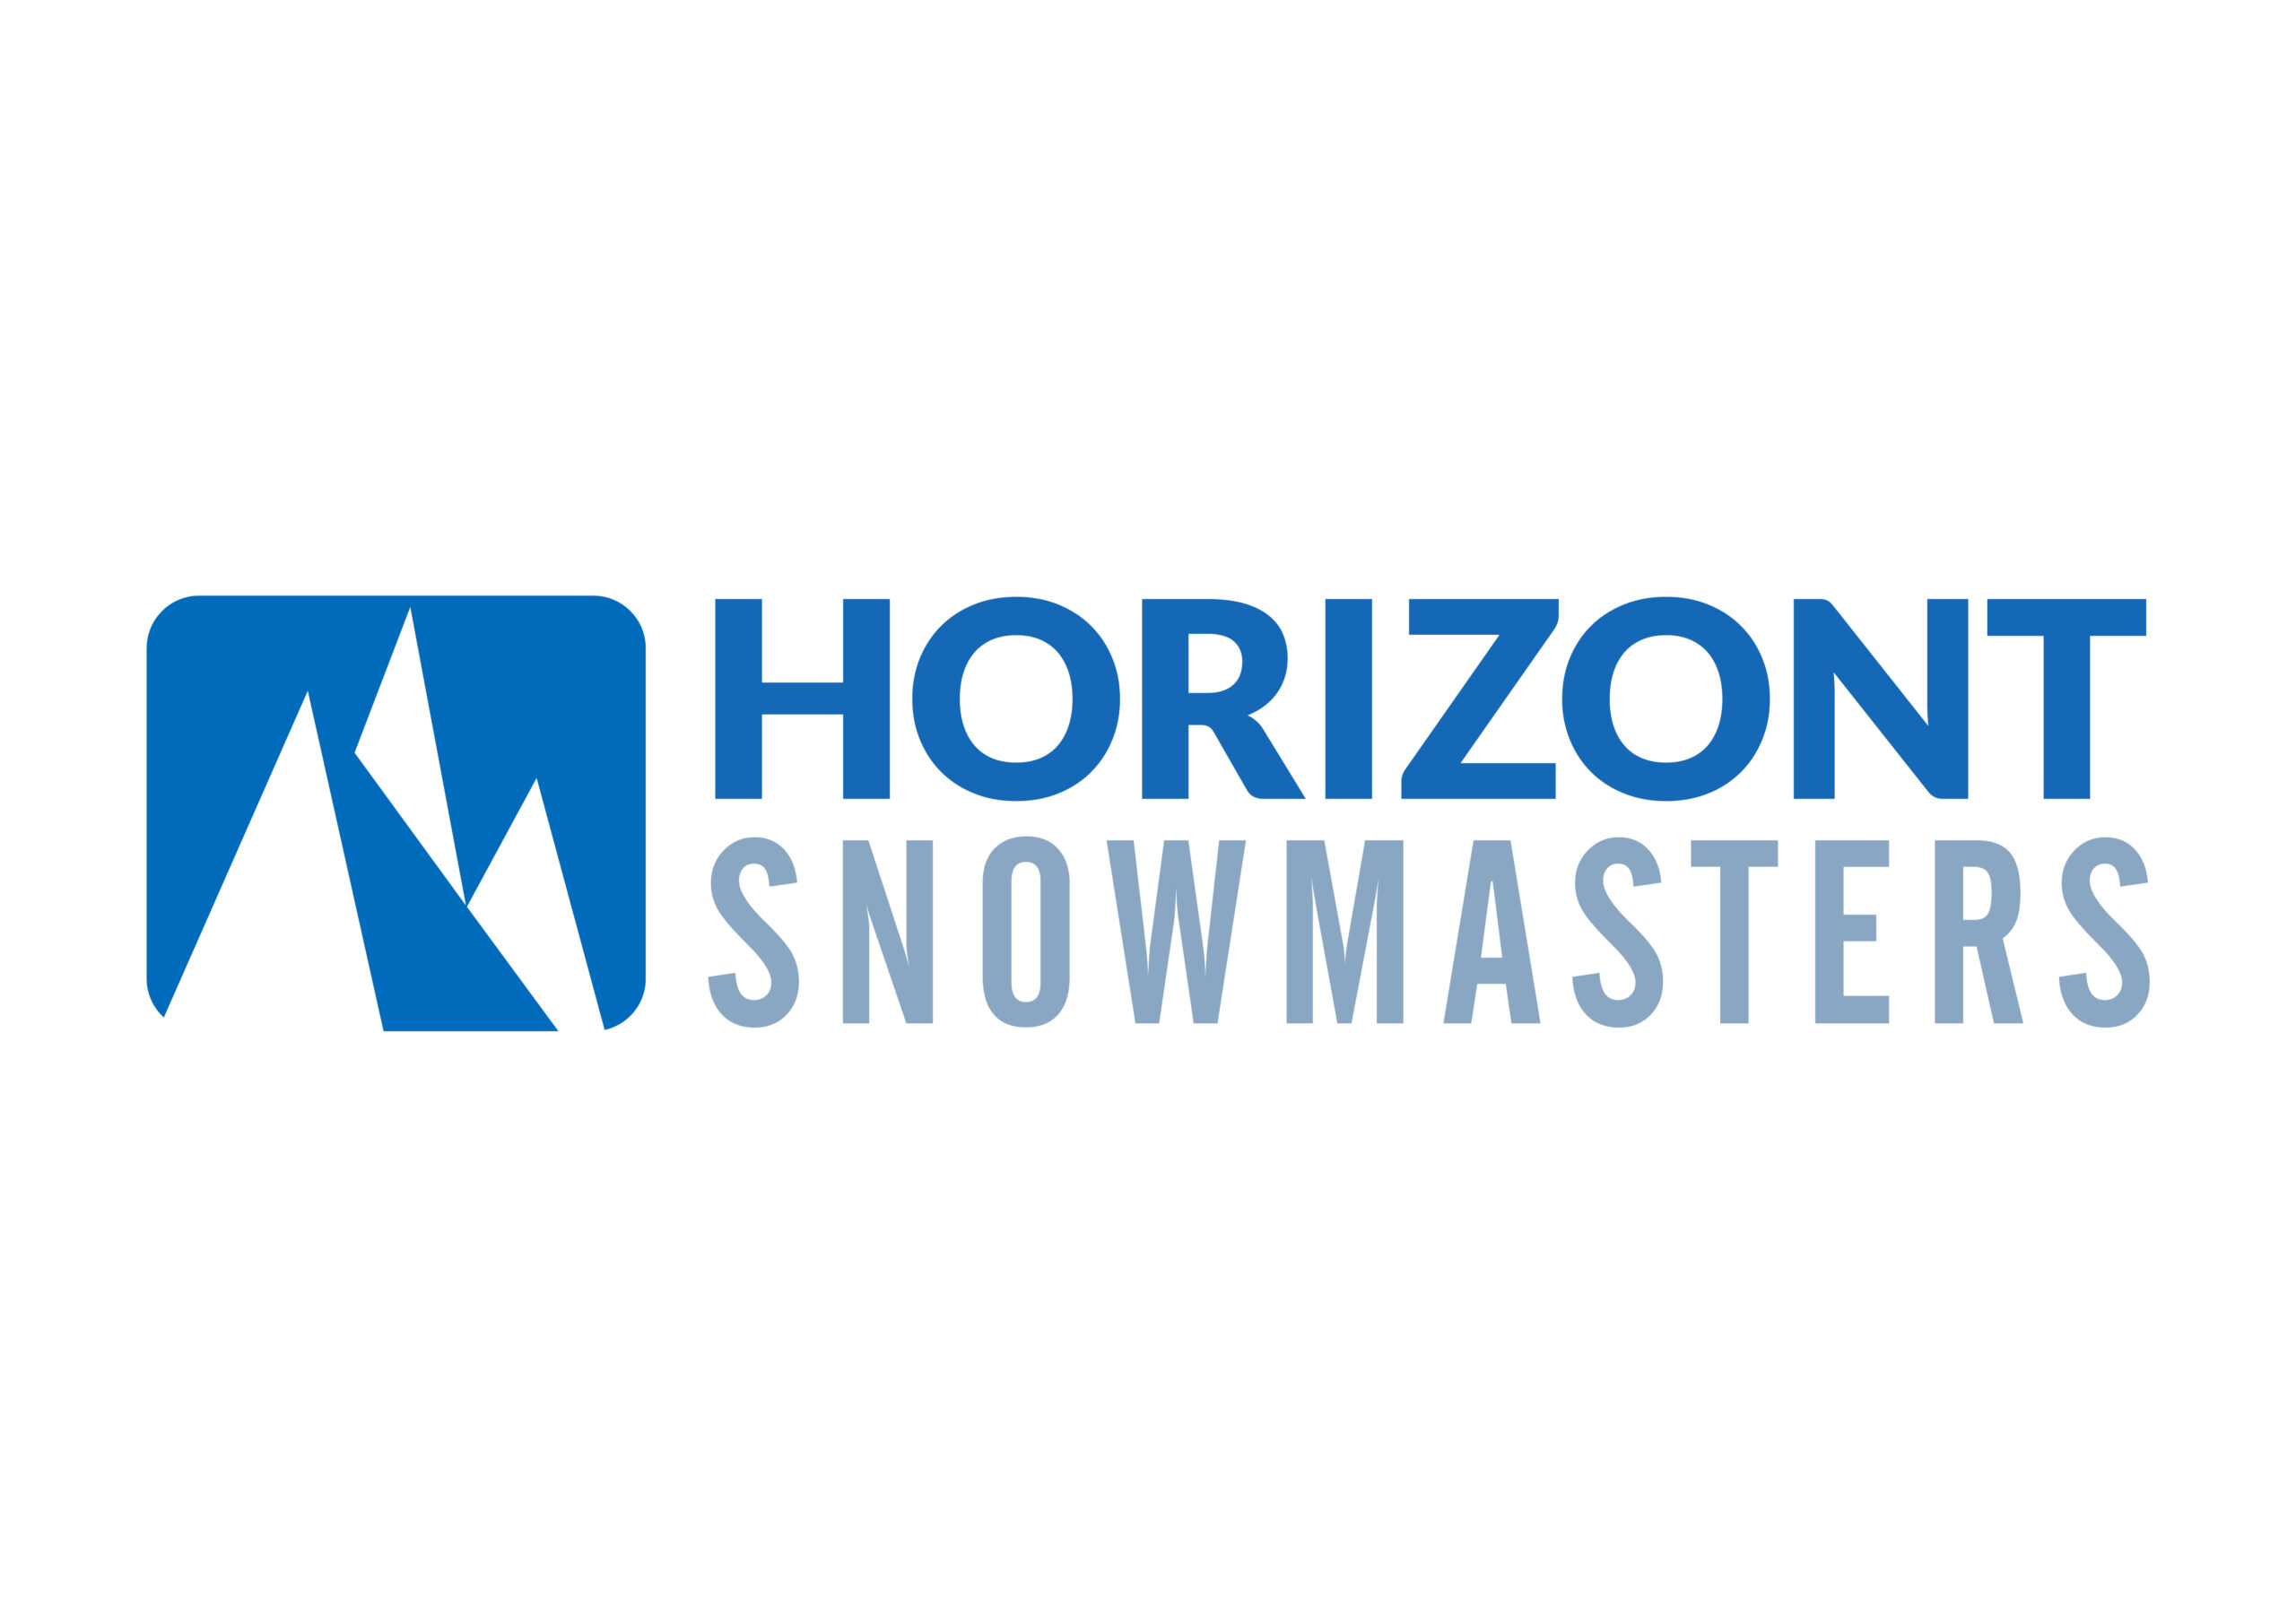 HORIZONT Snowmasters